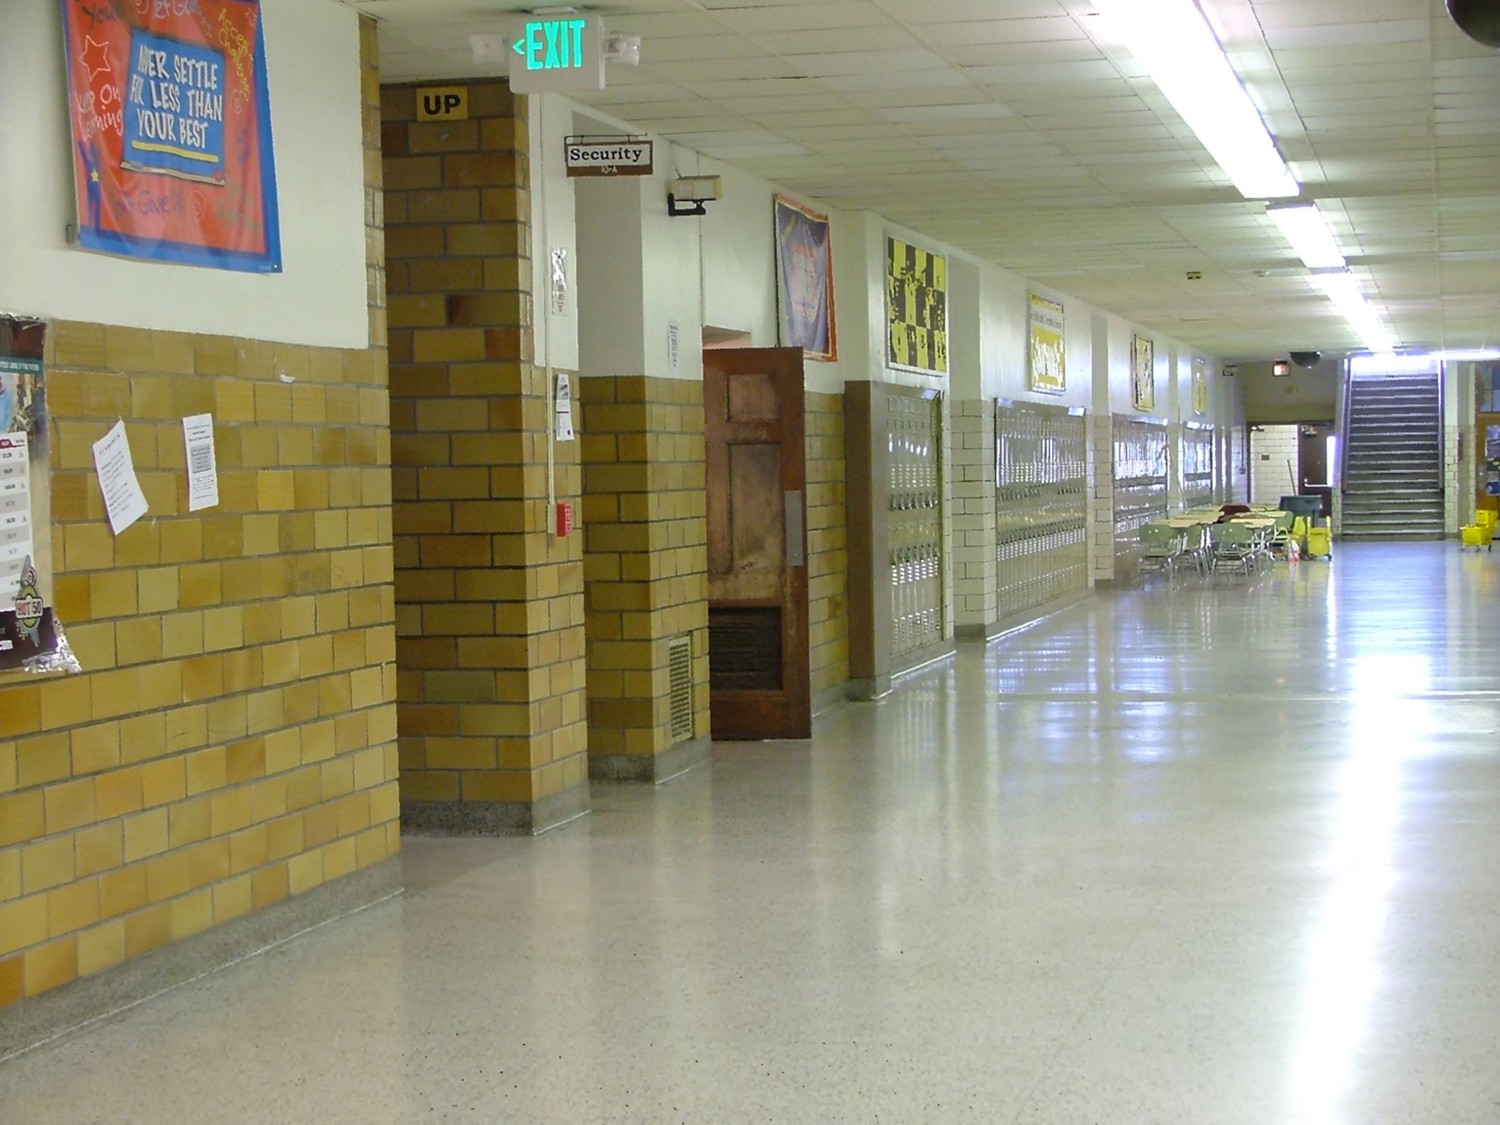 Theodore Roosevelt High School, Gary Indiana First floor hallway, 1930 section. Camera facing southwest (2012)